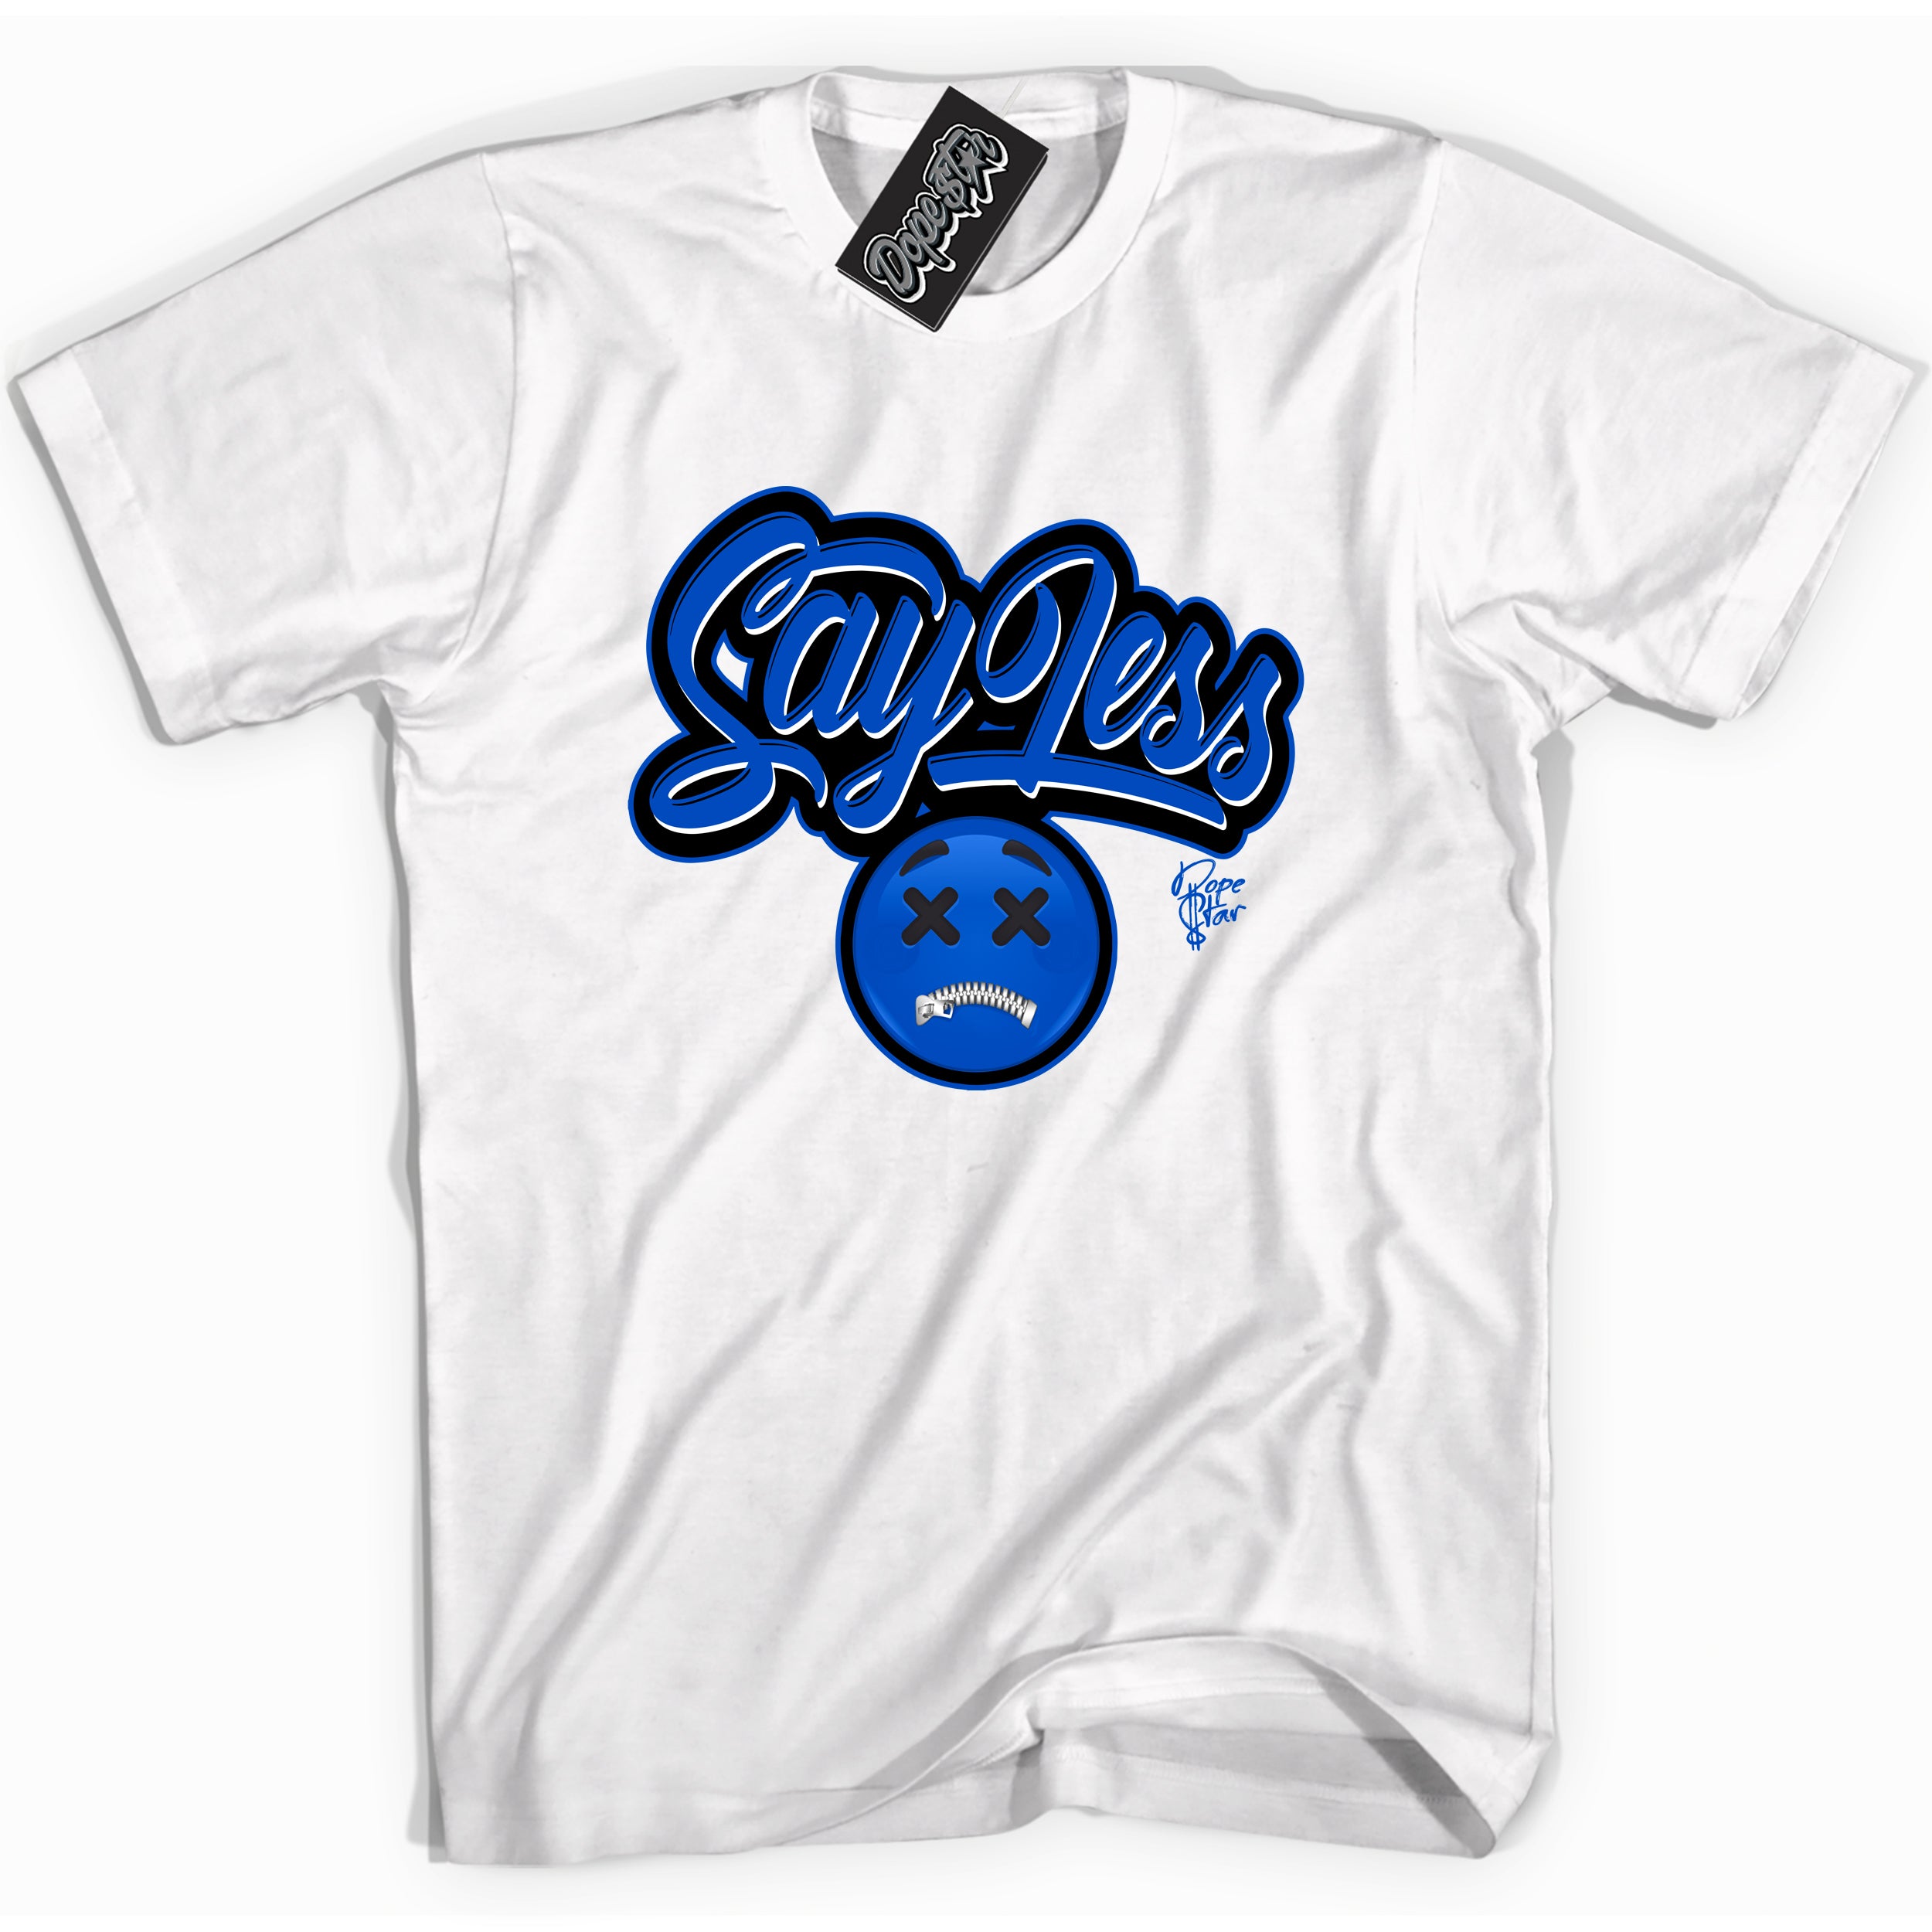 Cool White graphic tee with Say Less print, that perfectly matches OG Royal Reimagined 1s sneakers 